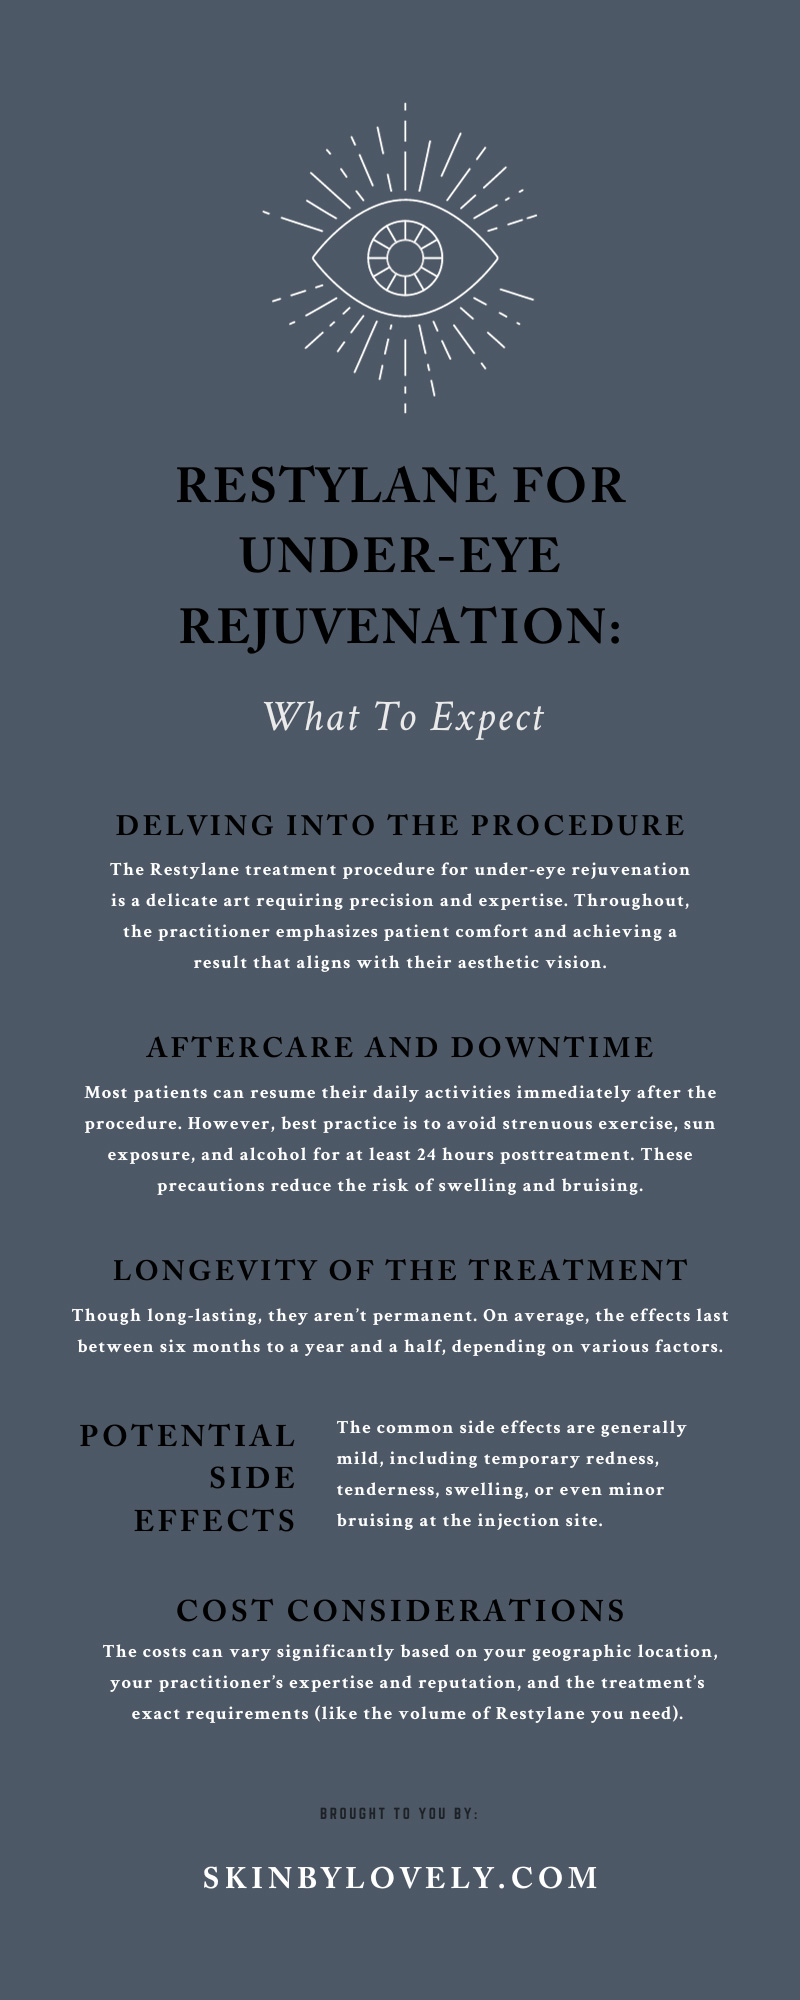 Restylane for Under-Eye Rejuvenation: What To Expect